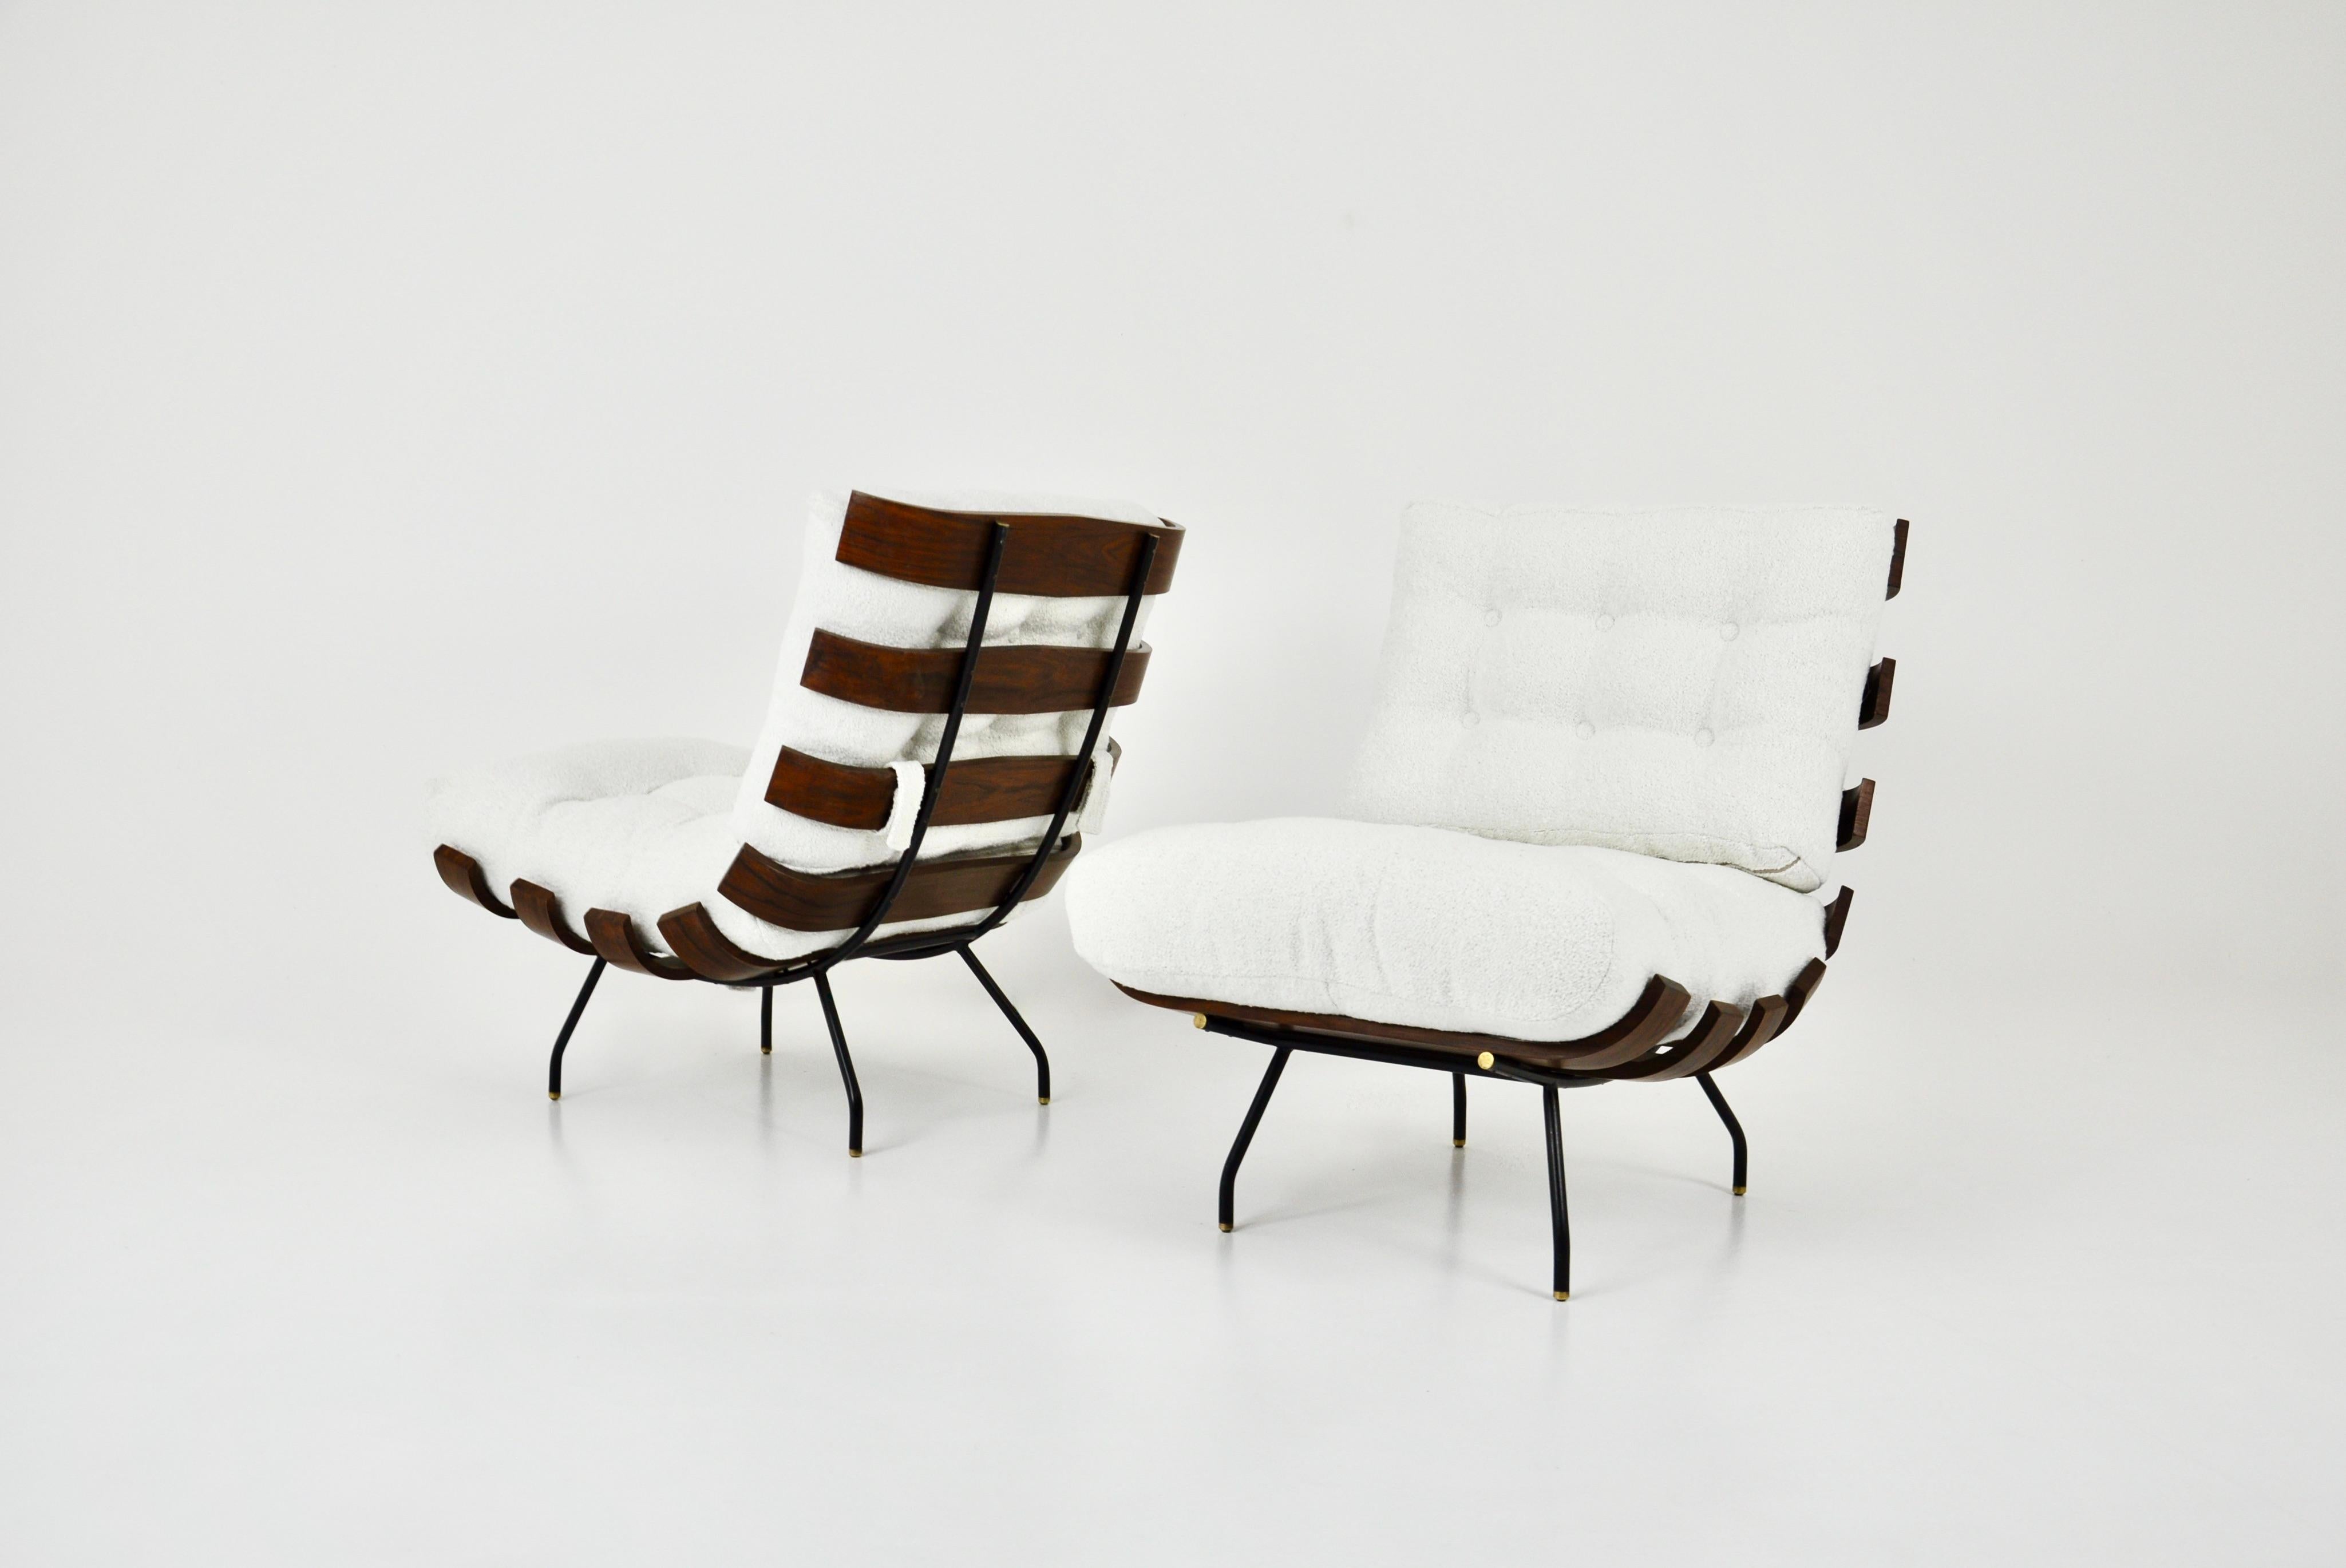 2 Costela lounge chairs in wood, metal legs and curly fabric cushions by Martin Eisler and Carlo Hauner.  Icons of Brazilian design. Seat height: 48 cm. Wear due to time and age of the lounge chairs. 